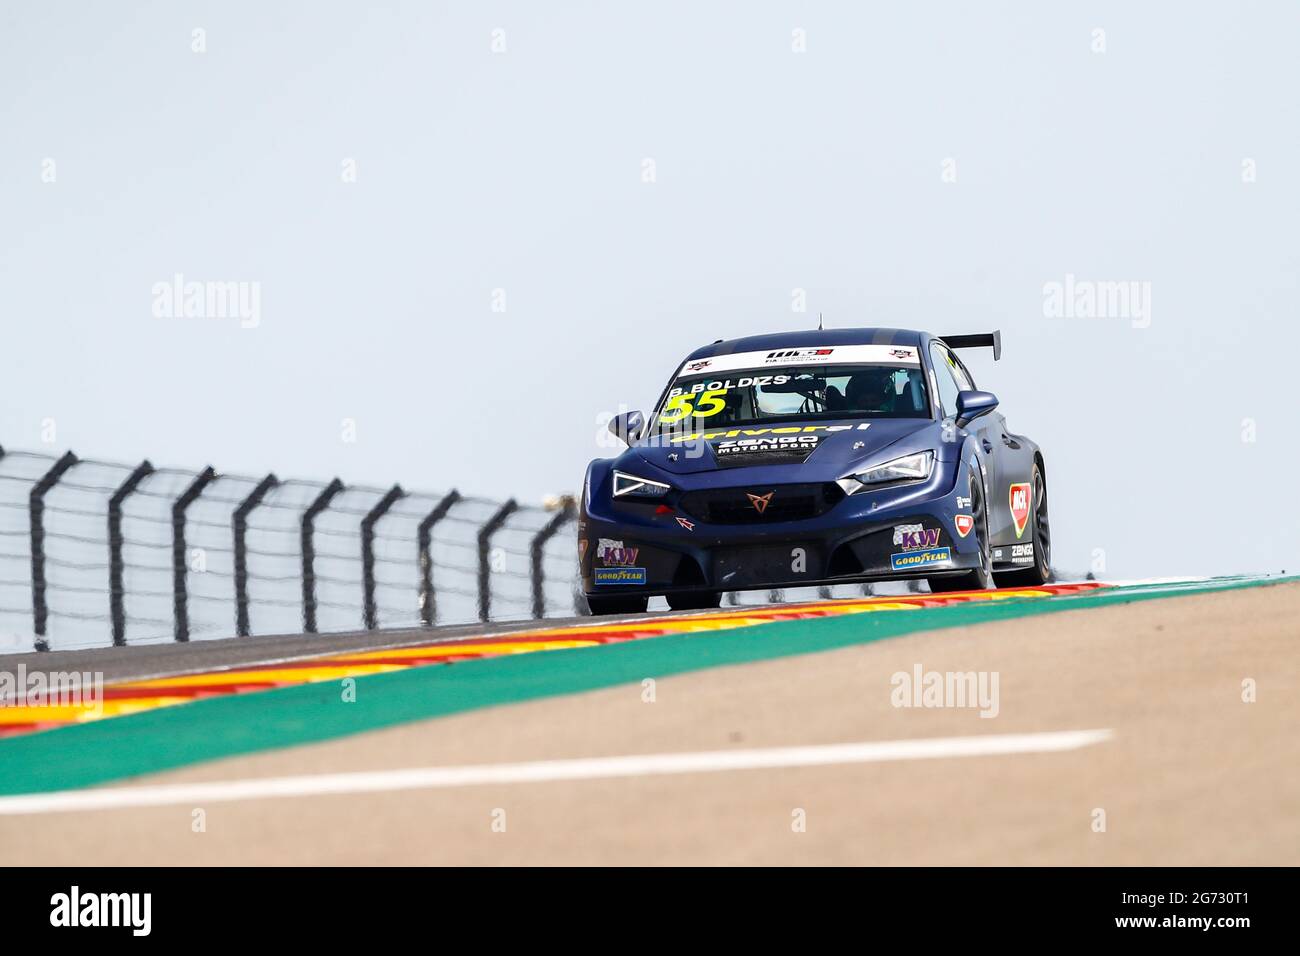 55 Boldizs Bence (hun), Zengo Motorsport Drivers' Academy, Cupa Leon Competicion TCR, action during the 2021 FIA WTCR Race of Spain, 3rd round of the 2021 FIA World Touring Car Cup, on the Ciudad del Motor de Aragon, from July 10 to 11, 2021 in Alcaniz, Spain - Photo Xavi Bonilla / DPPI Stock Photo